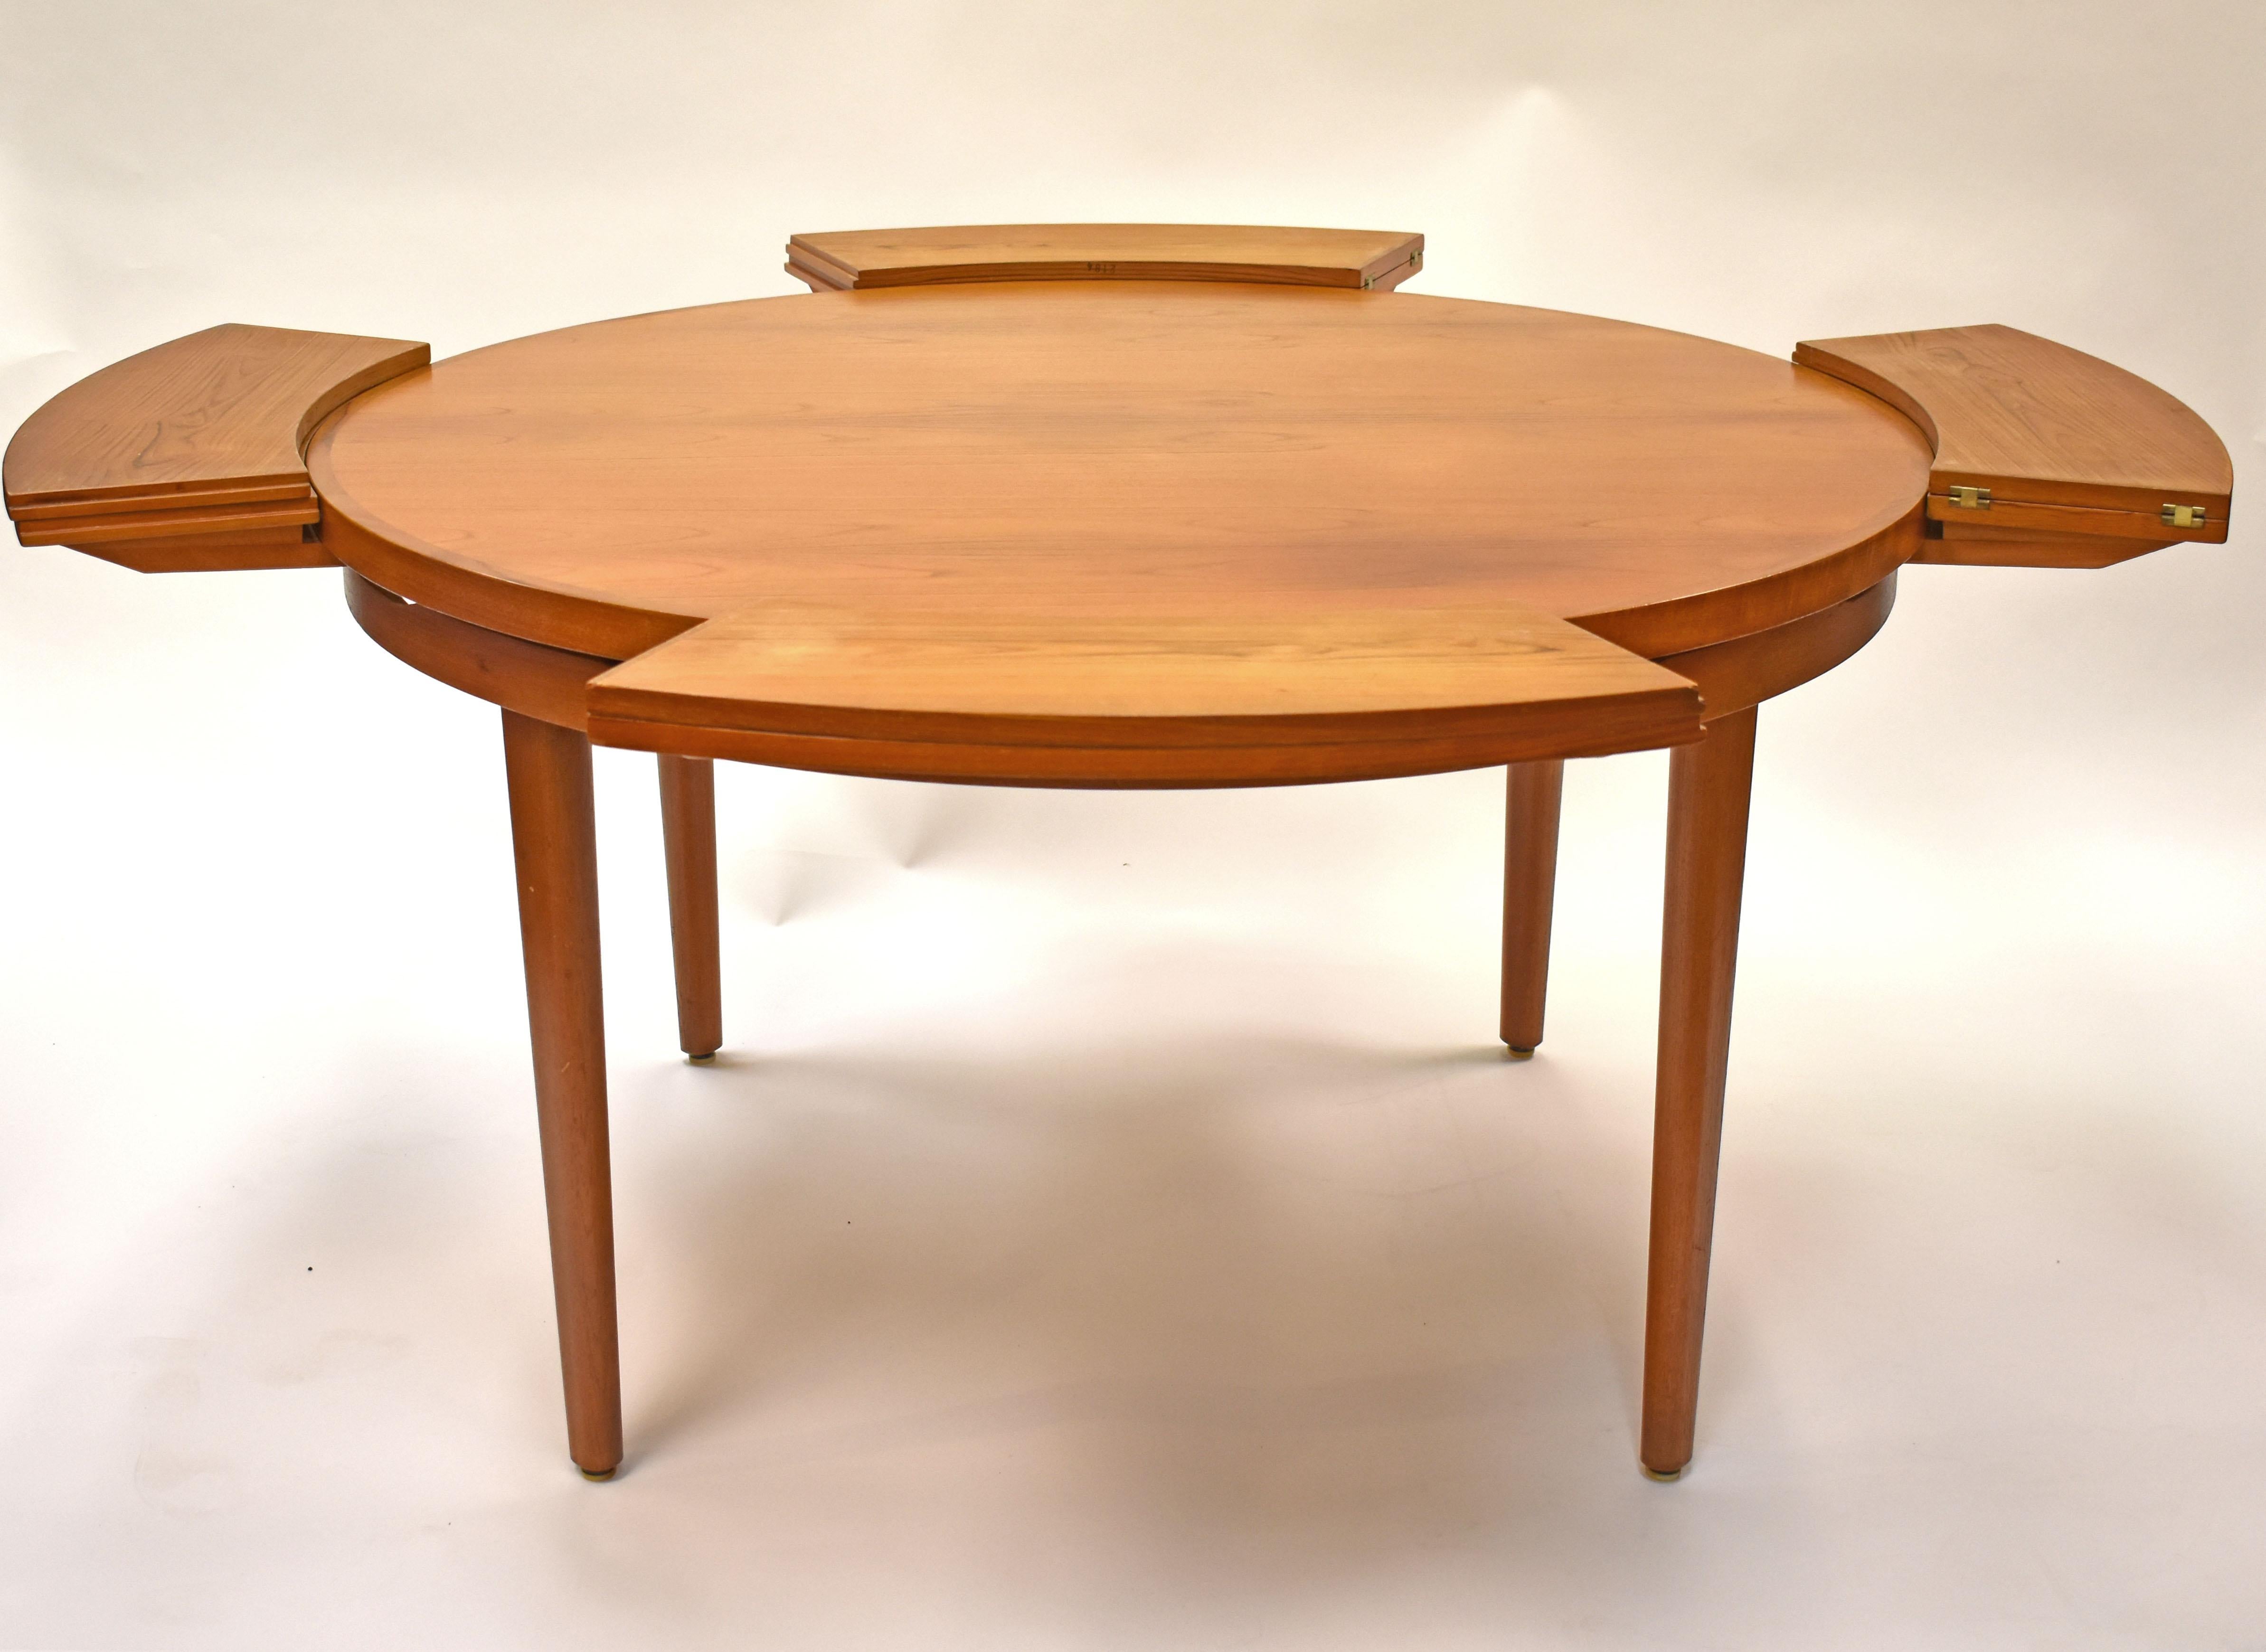 Unique and hard-to-find. This teak lotus dining table is by Dyrlund. The unusual design expands from 51